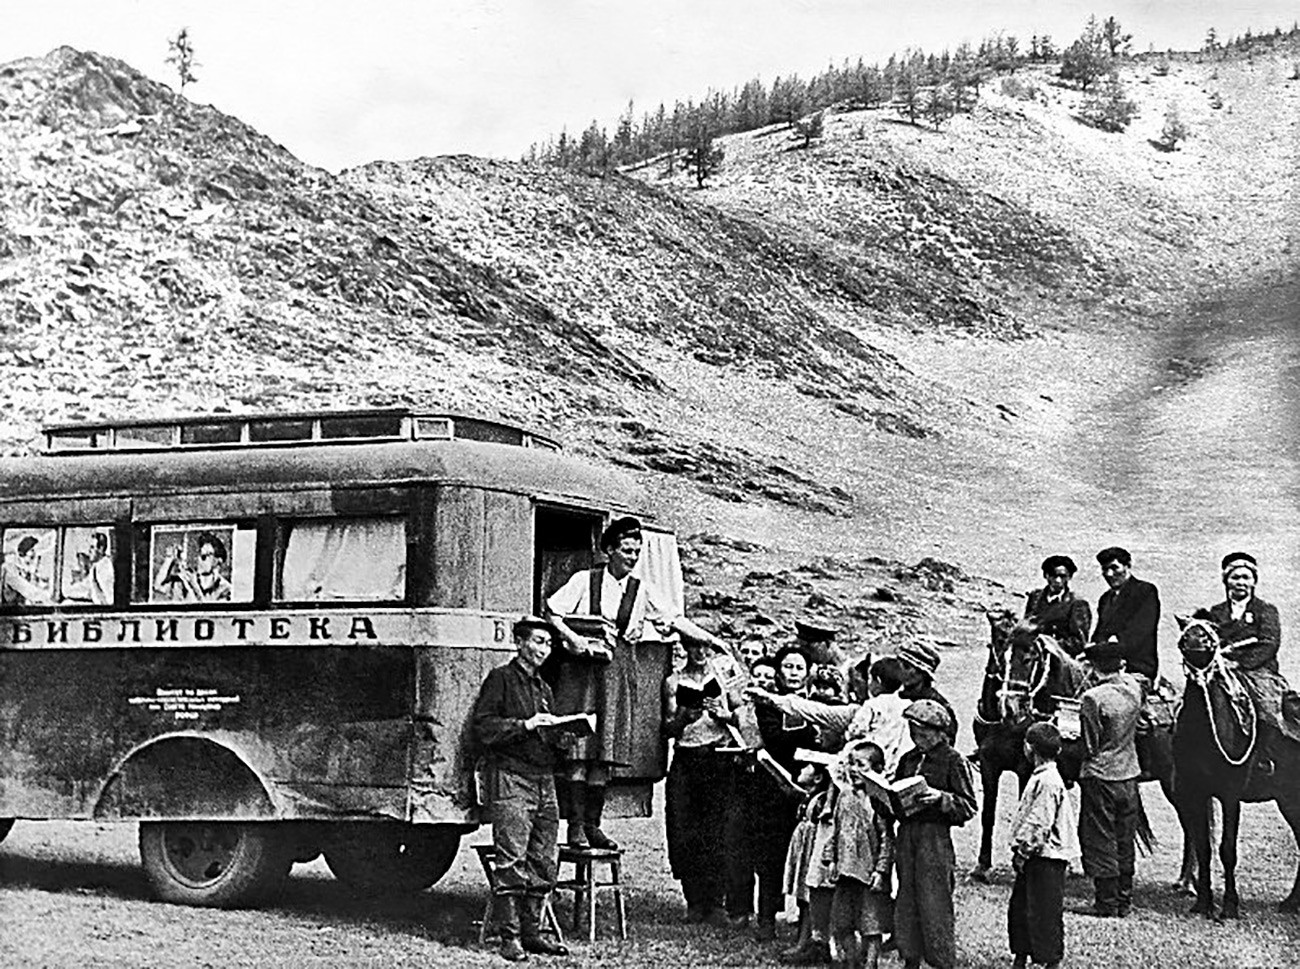 Mobile library at the Dyany Dyol kolkhoz, Altai Territory, 1937-1939.